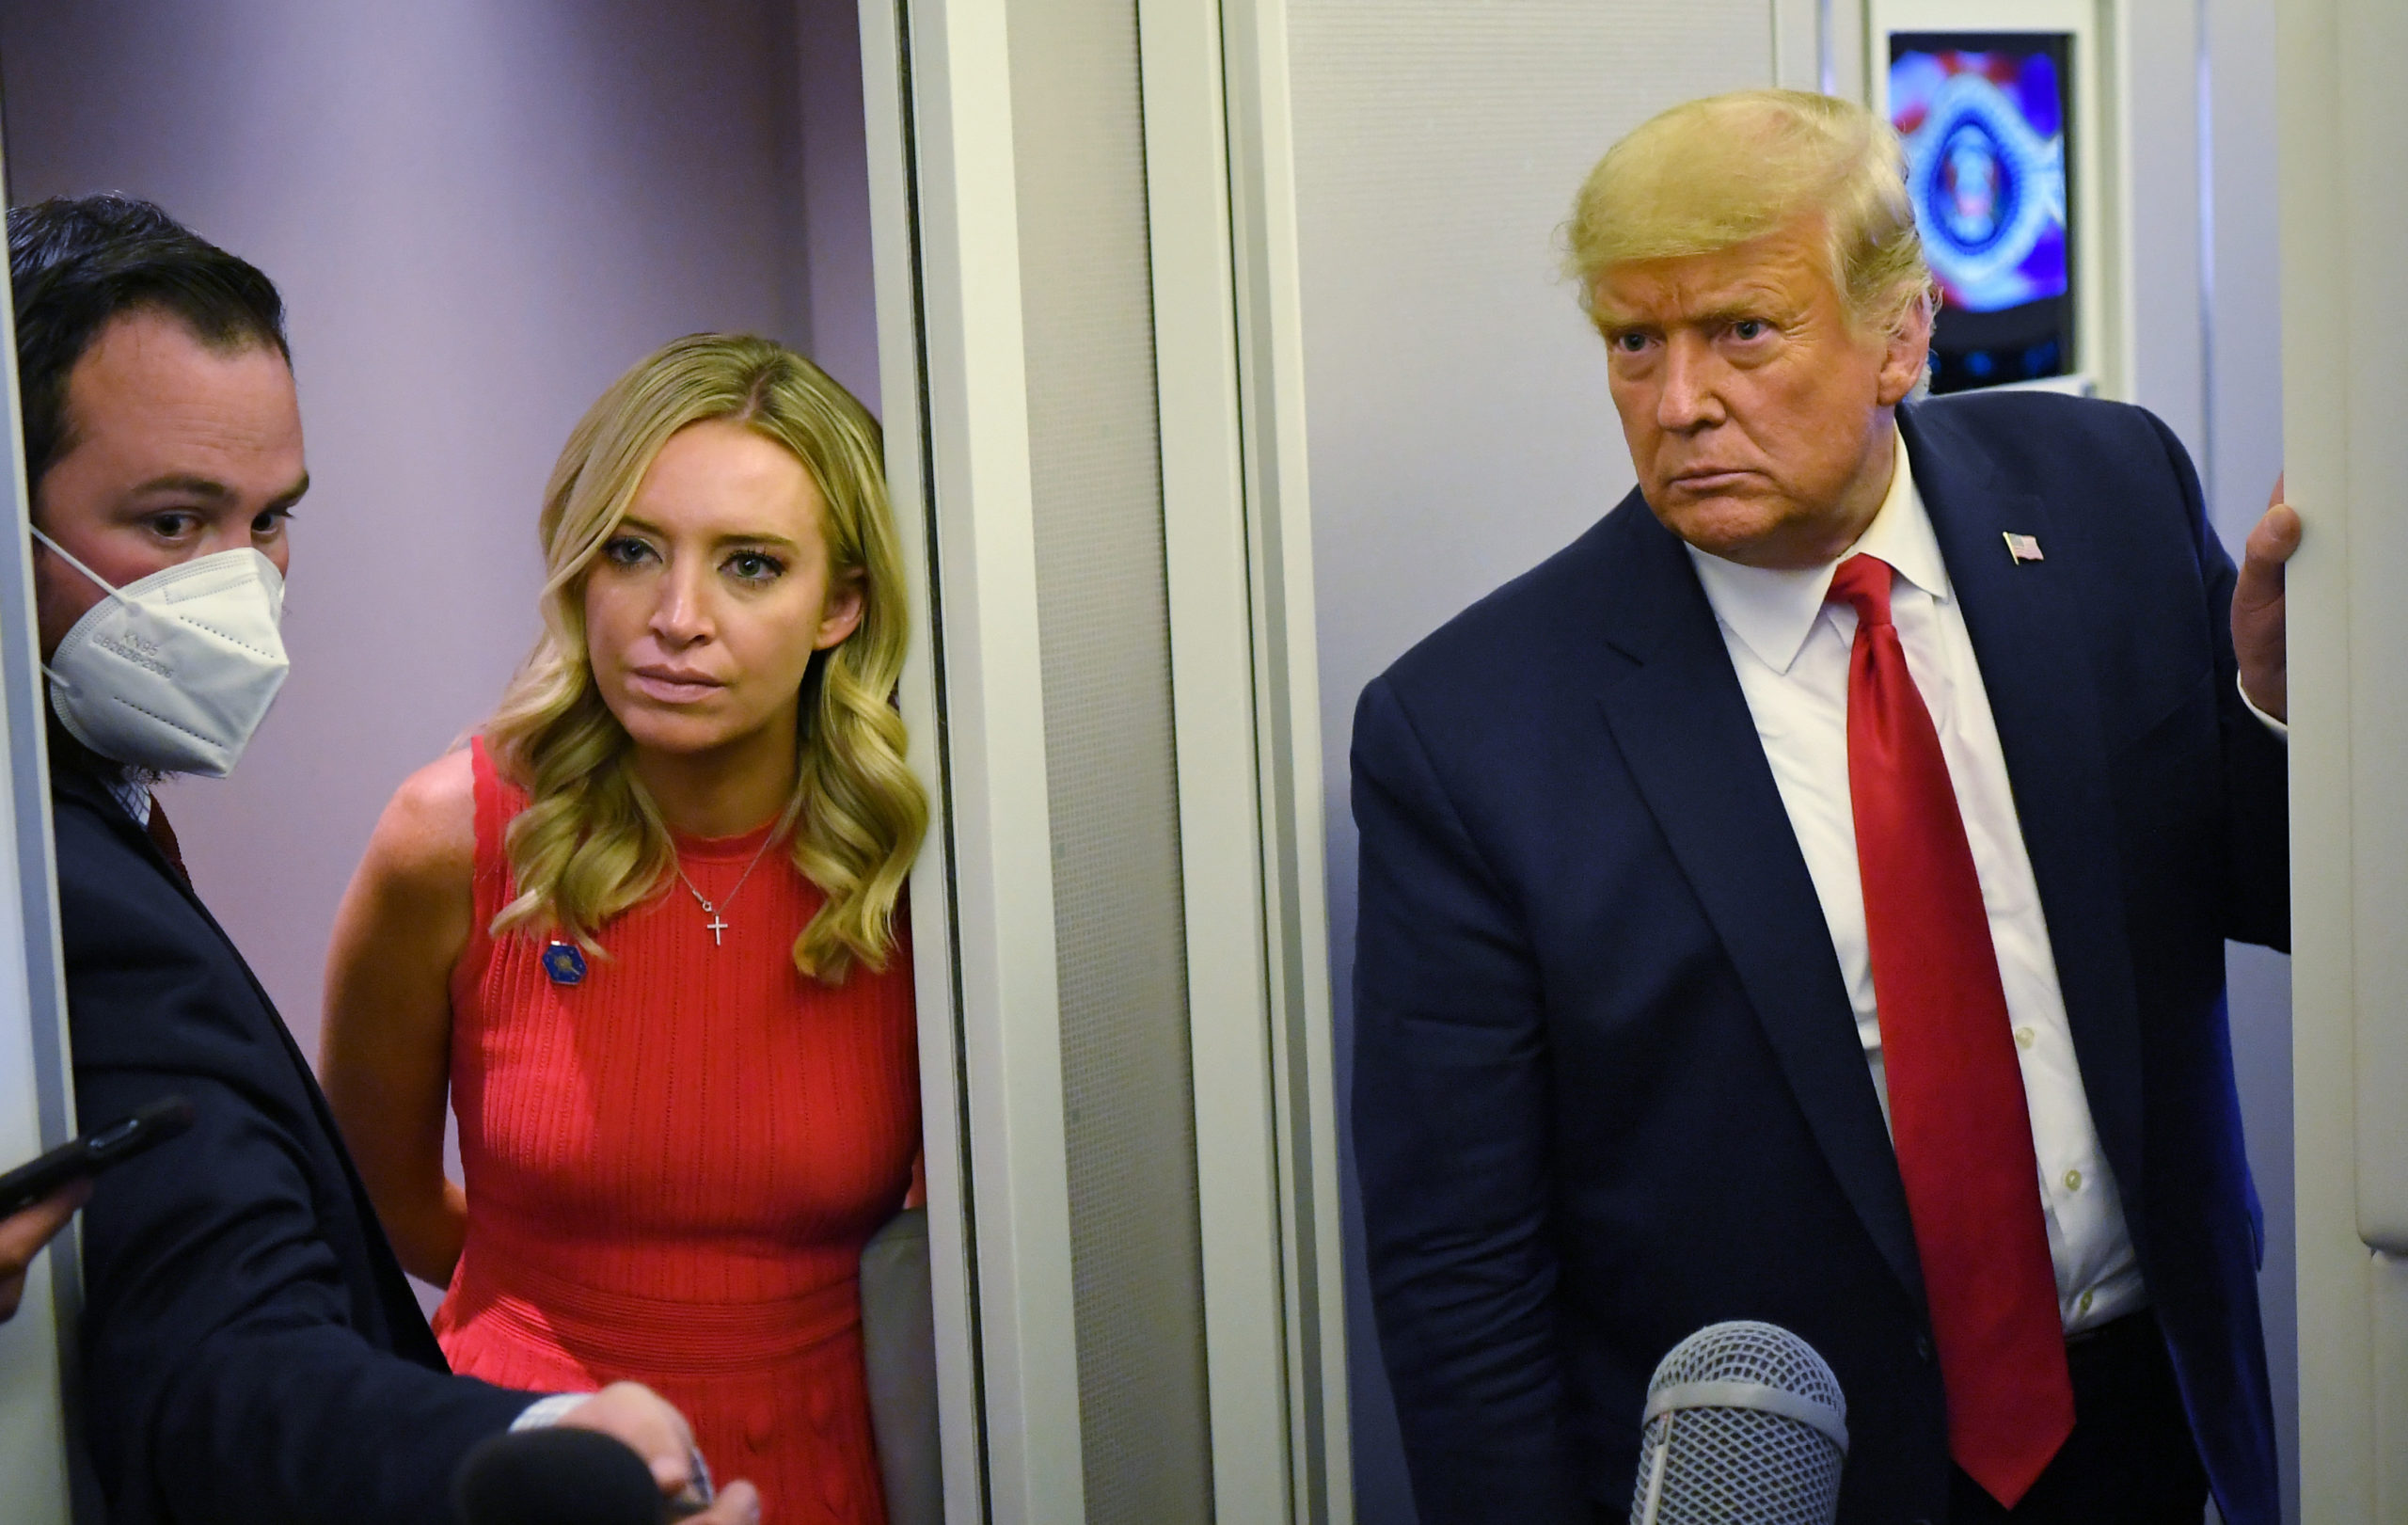 US President Donald Trump, flanked by White House Press Secretary Kayleigh McEnany (L), speaks reporters while in flight aboard Air Force One shortly before landing at Andrews Air Force Base in Maryland on October 19, 2020 (Photo by MANDEL NGAN/AFP via Getty Images)